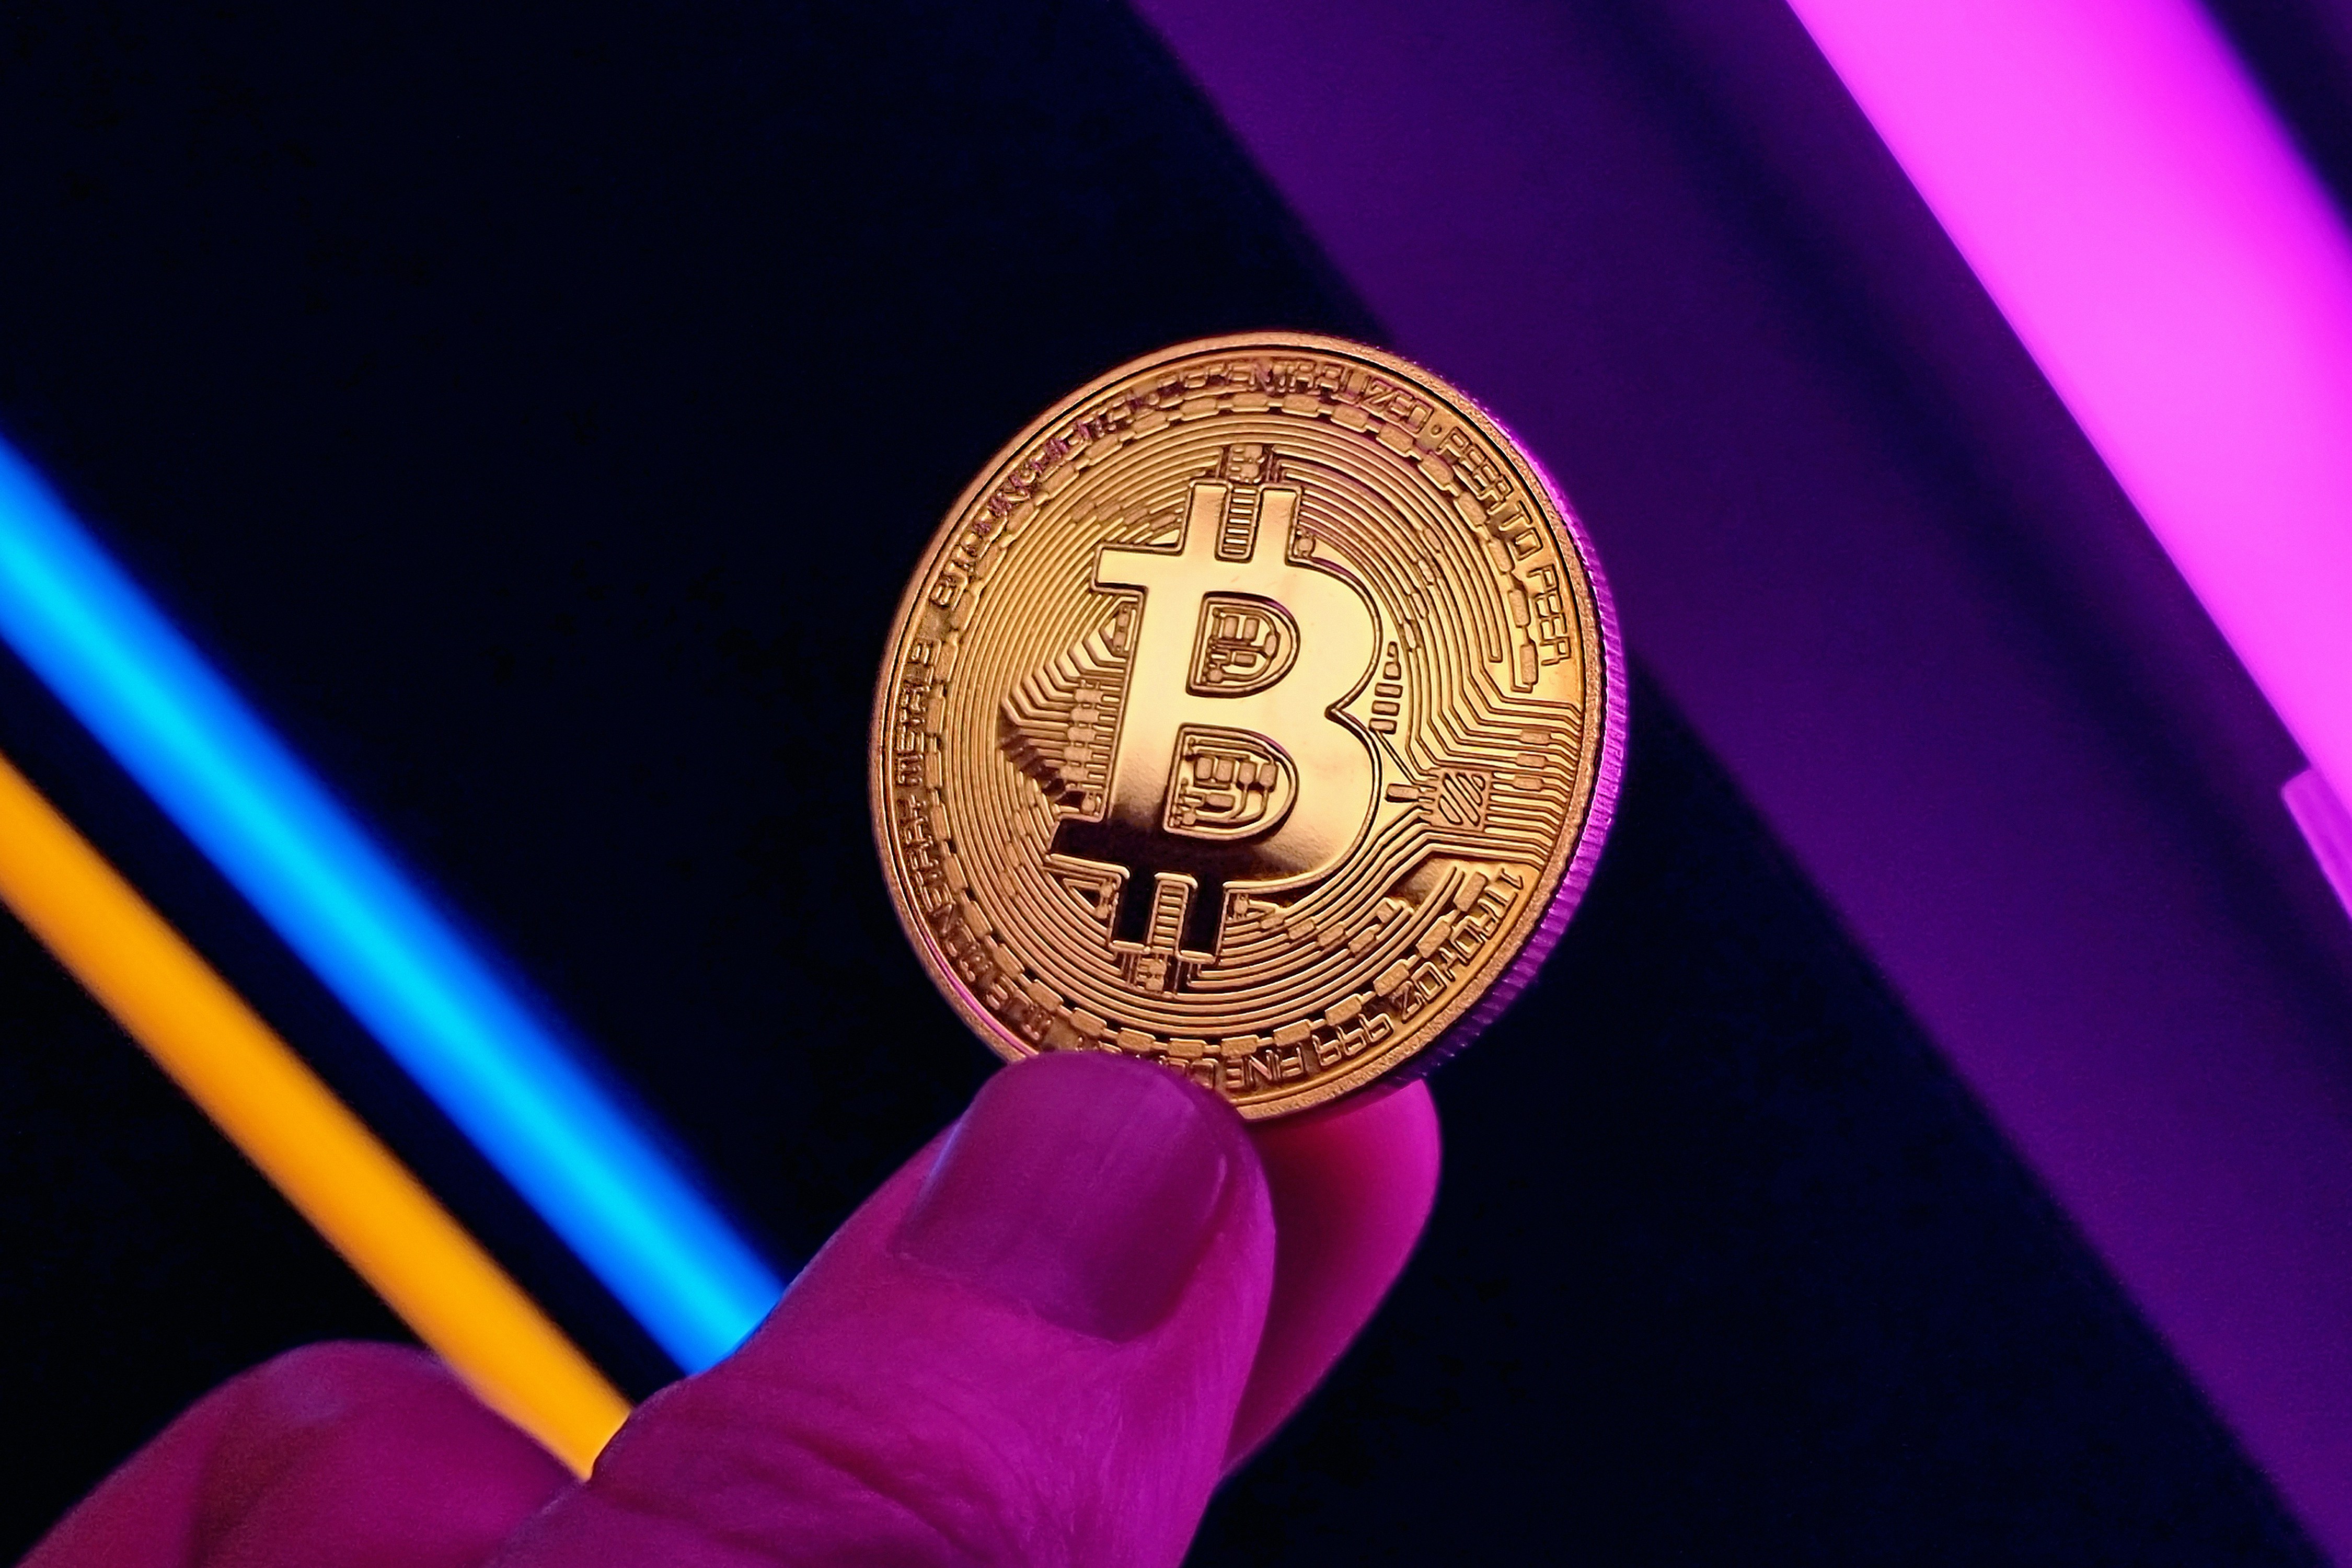 Young man holding gold Bitcoin cryptocurrency coin between his fingers, against ambient neon lights. Purple, blue and orange lights in the background.